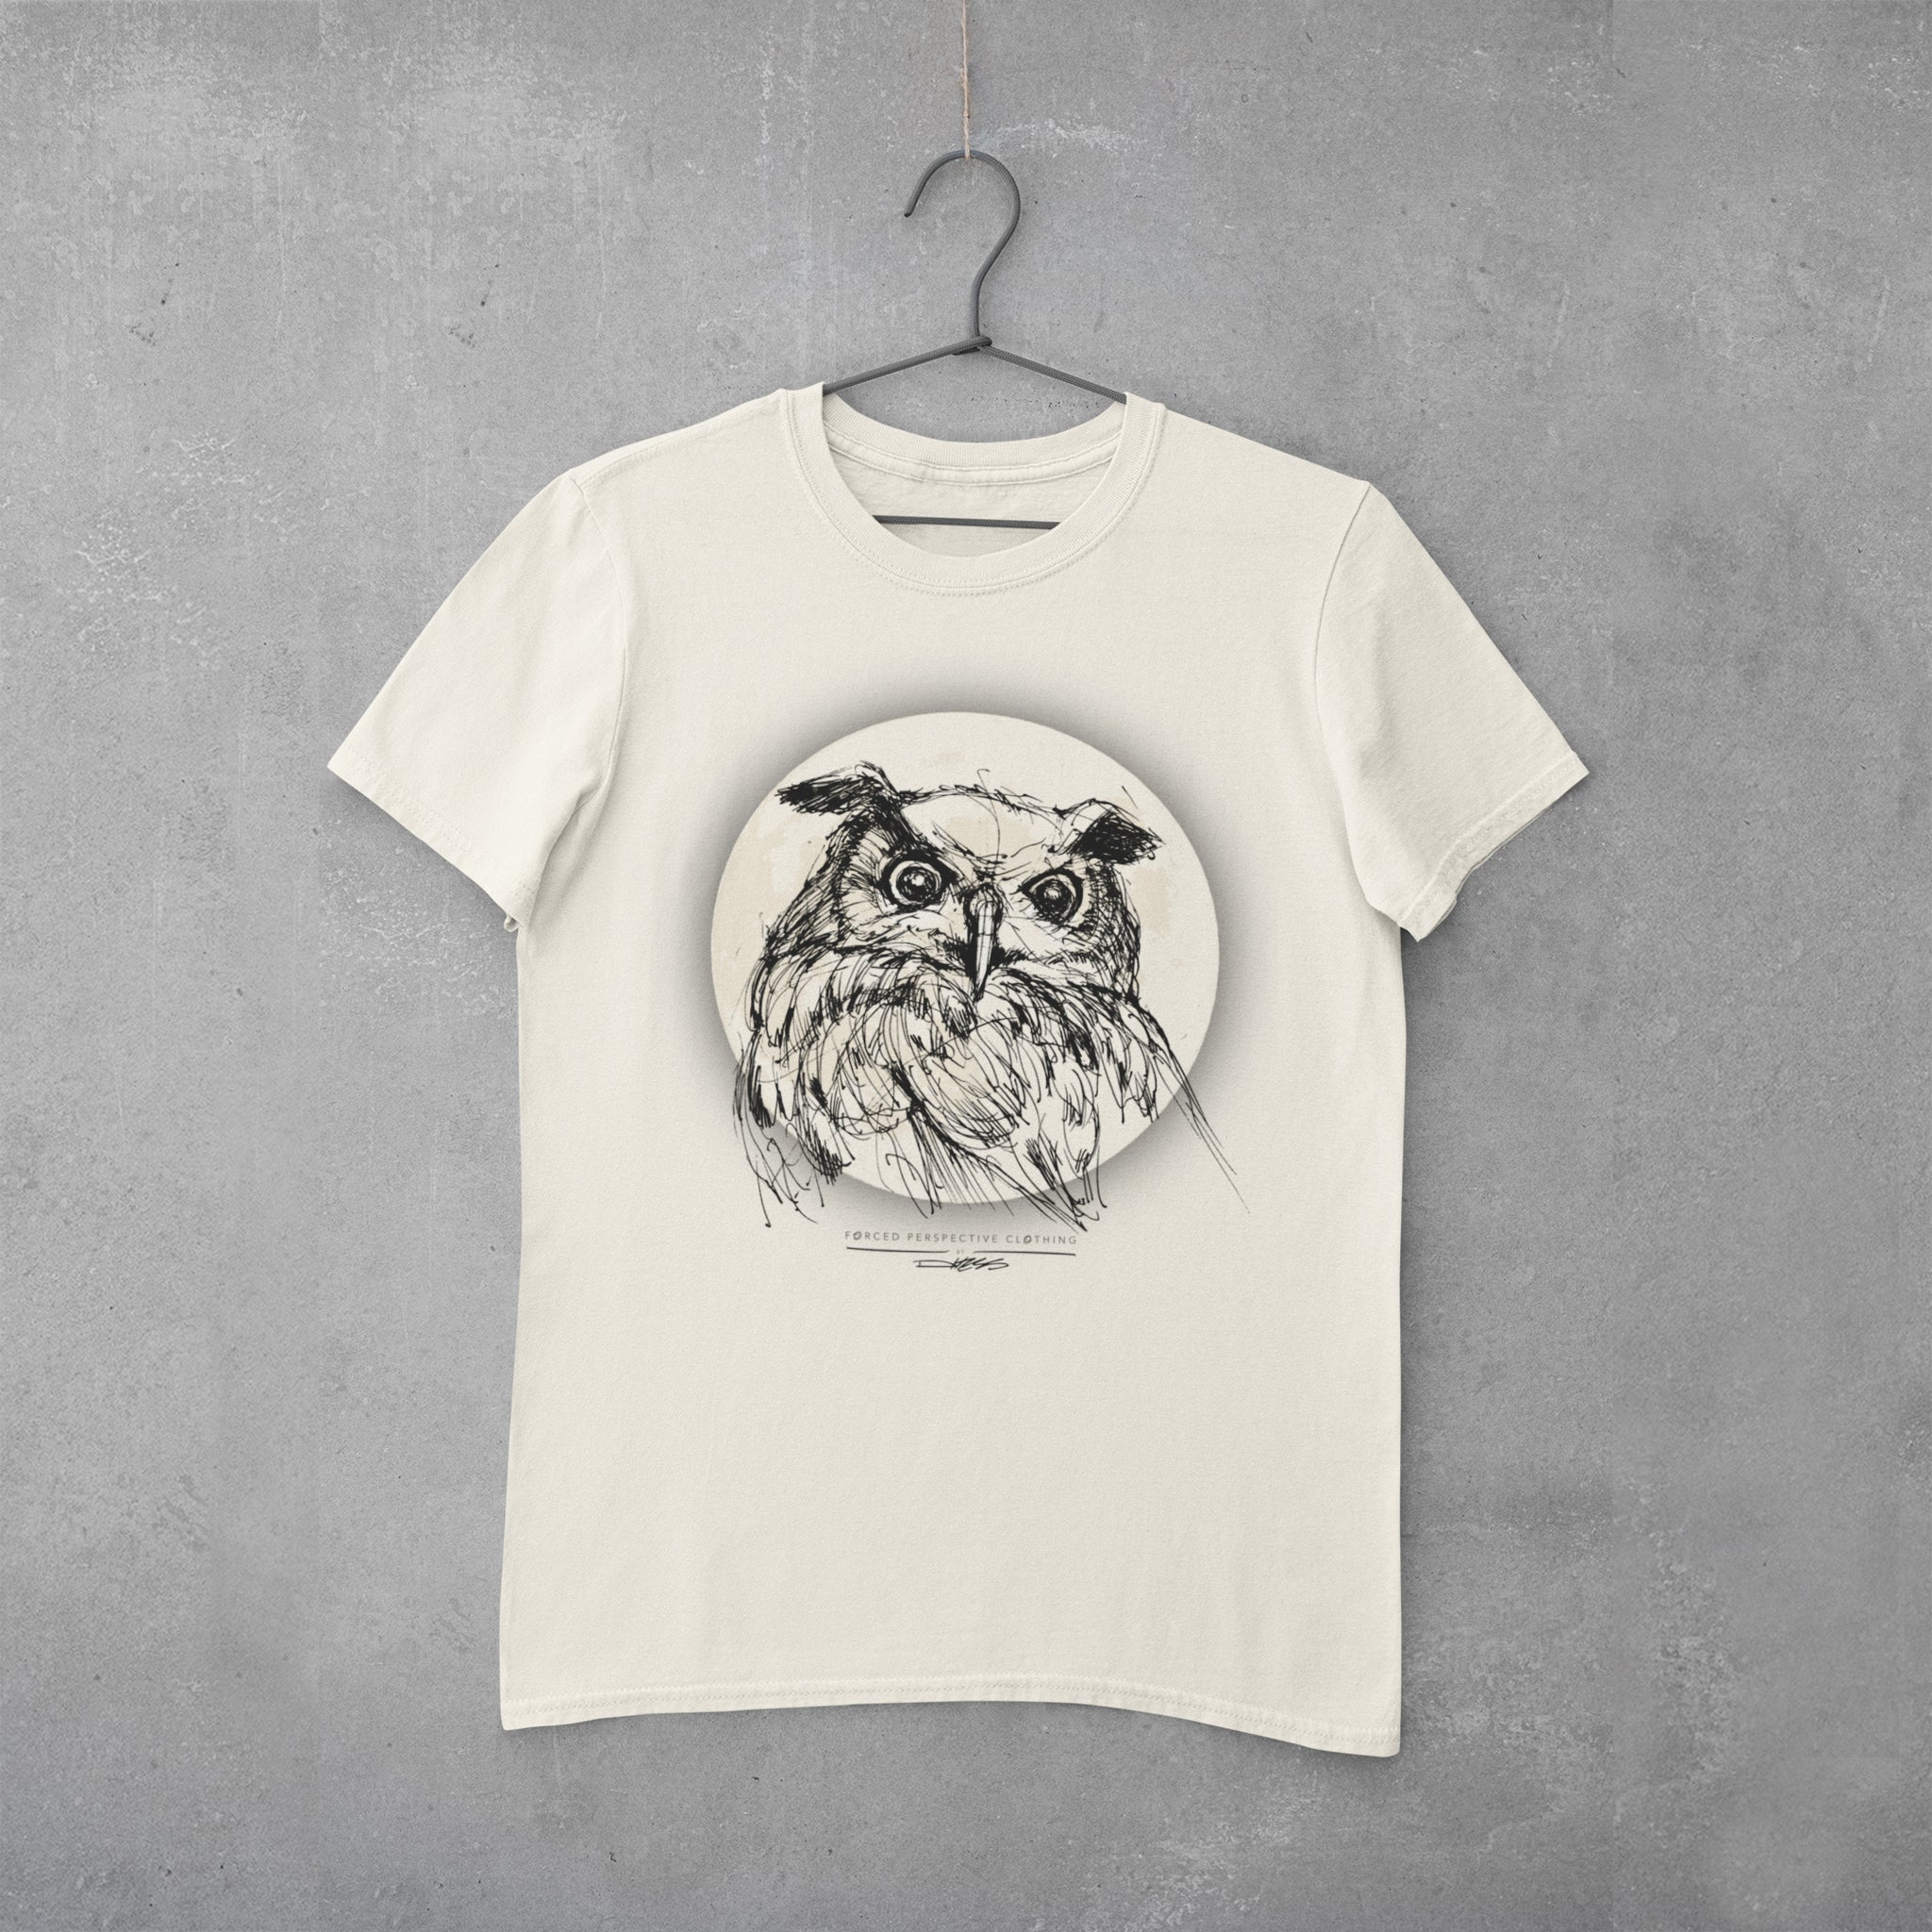 Nocturnal Wisdom Shirt and Print